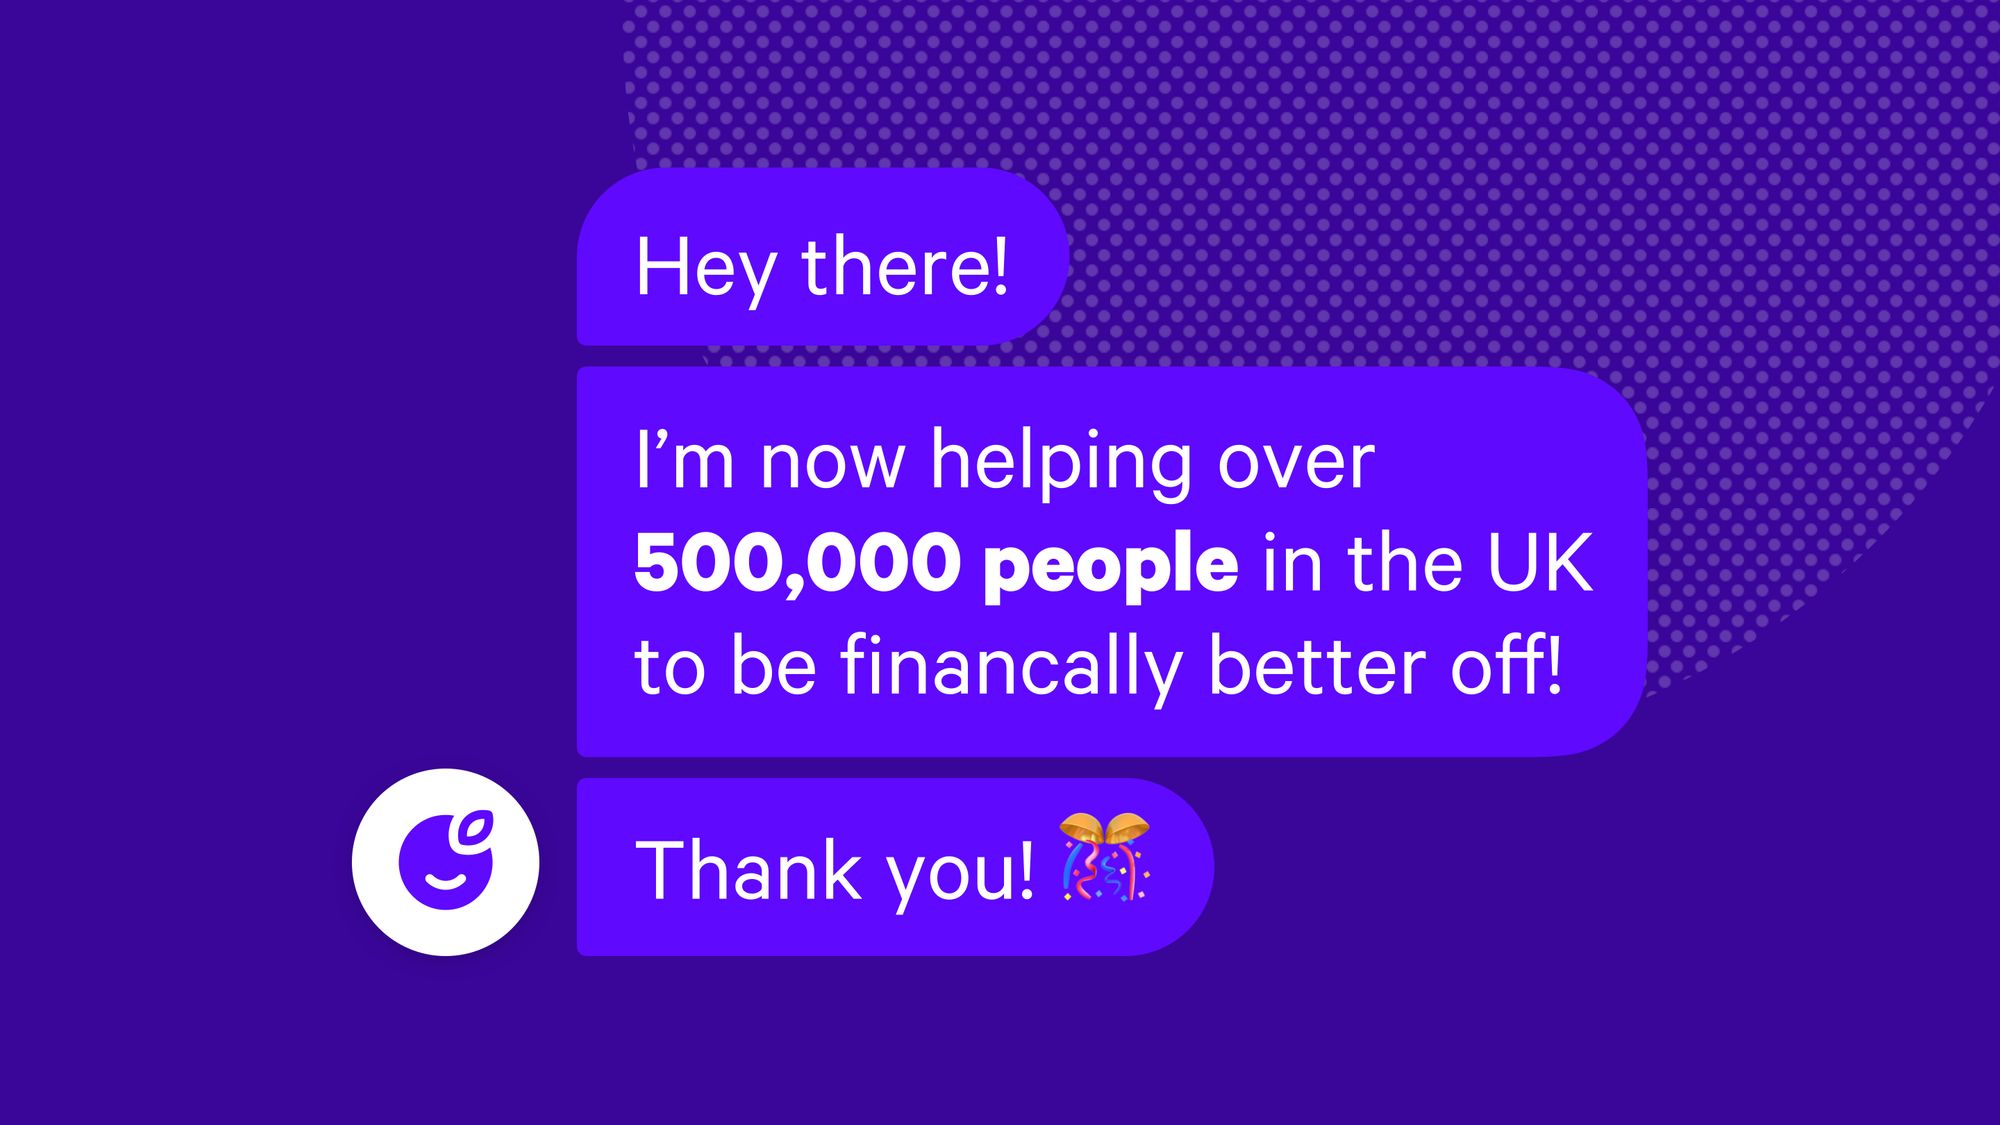 We're now helping over 500,000 people in the UK 🎉